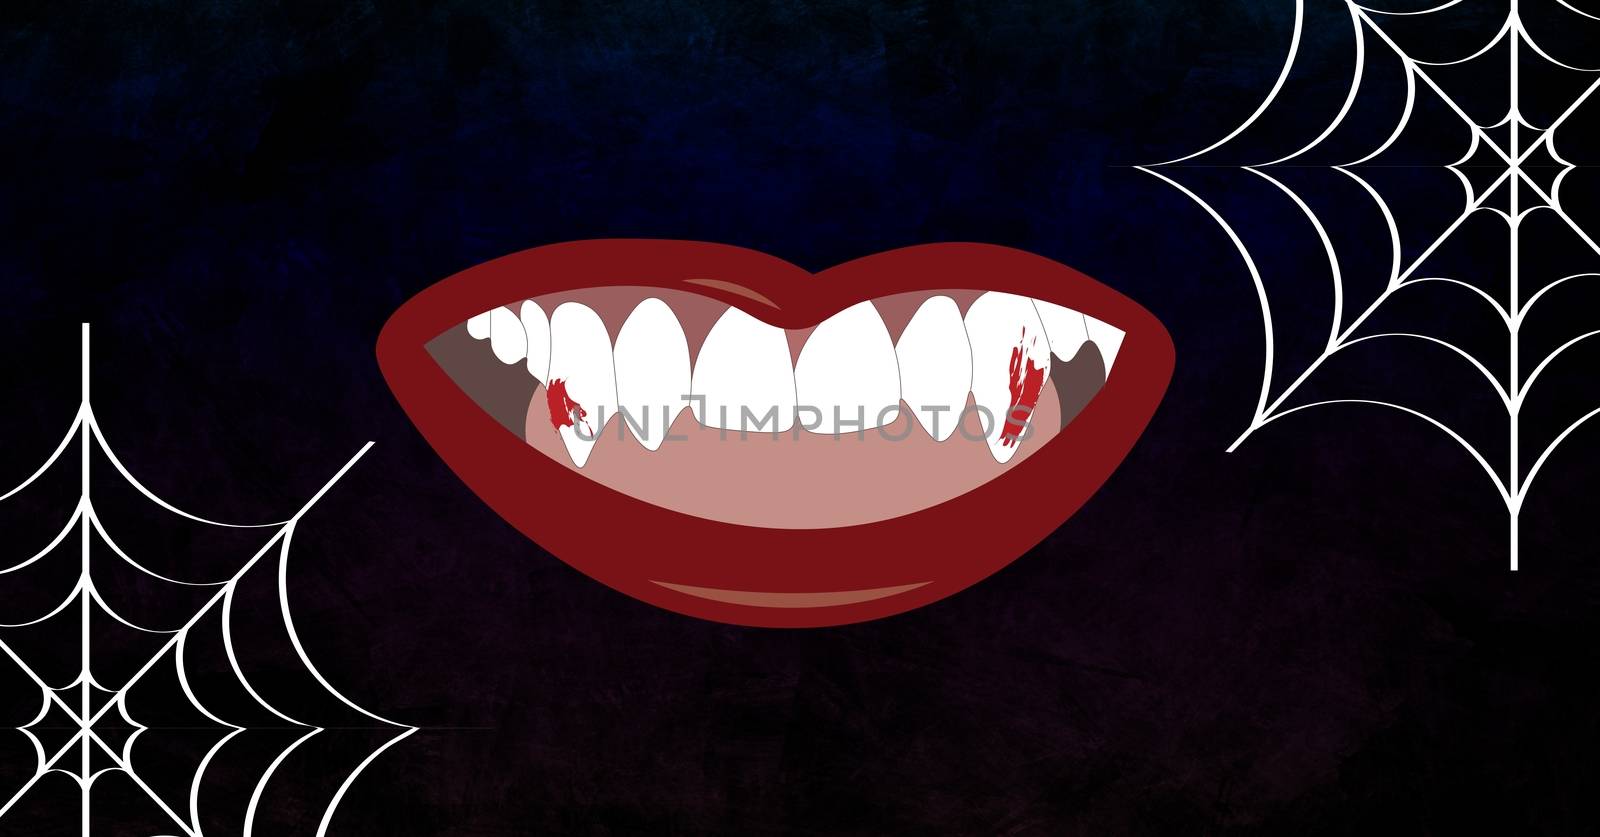 Digital composite of Lipstick with fangs and halloween cobwebs illustrations